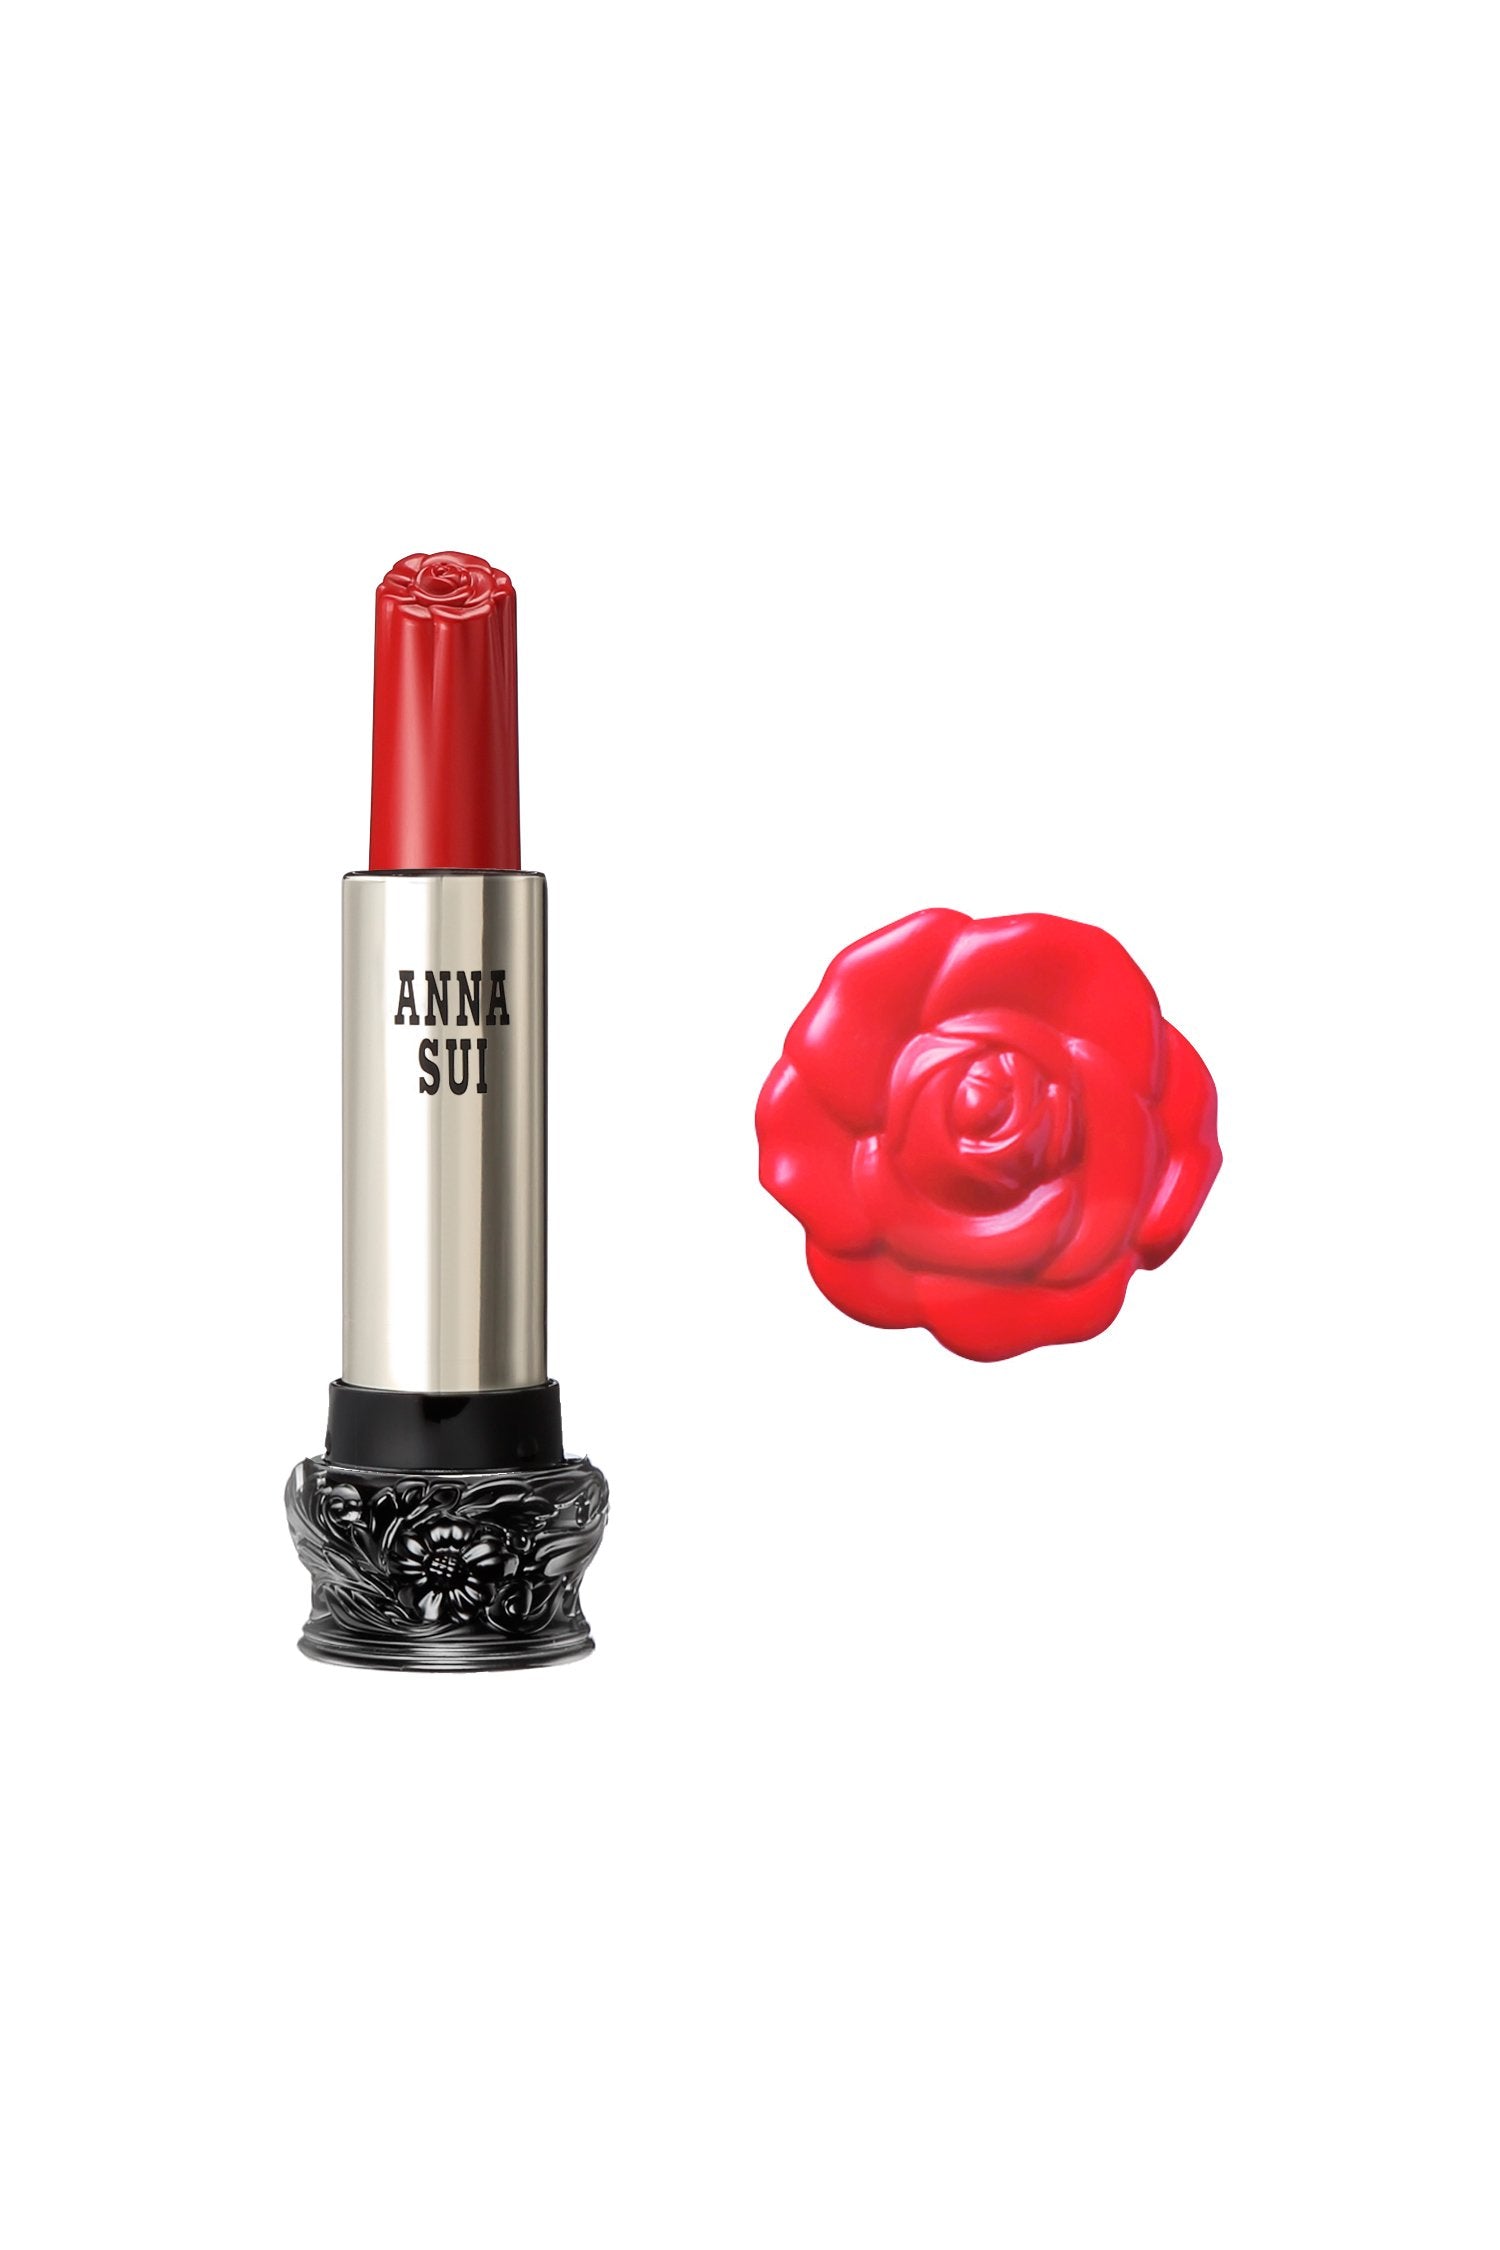 401 - Red Carnation Lipstick F: Fairy Flower, in a cylindrical container, large black base, engraved floral design, metallic body